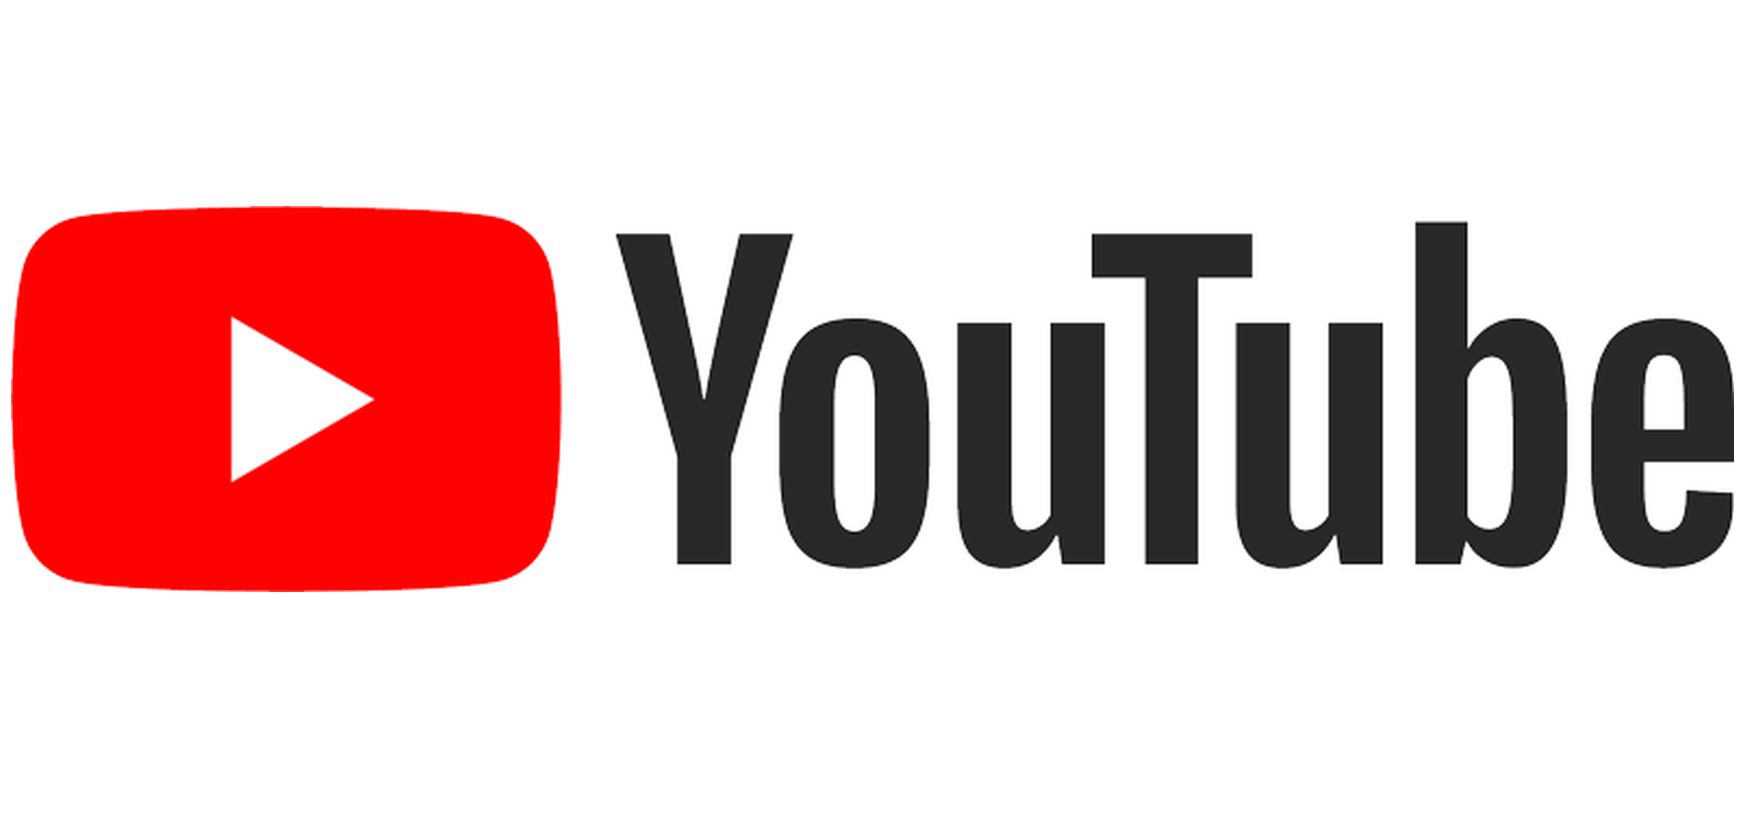 YouTube gets a brand new logo and a new look for both mobile and desktop